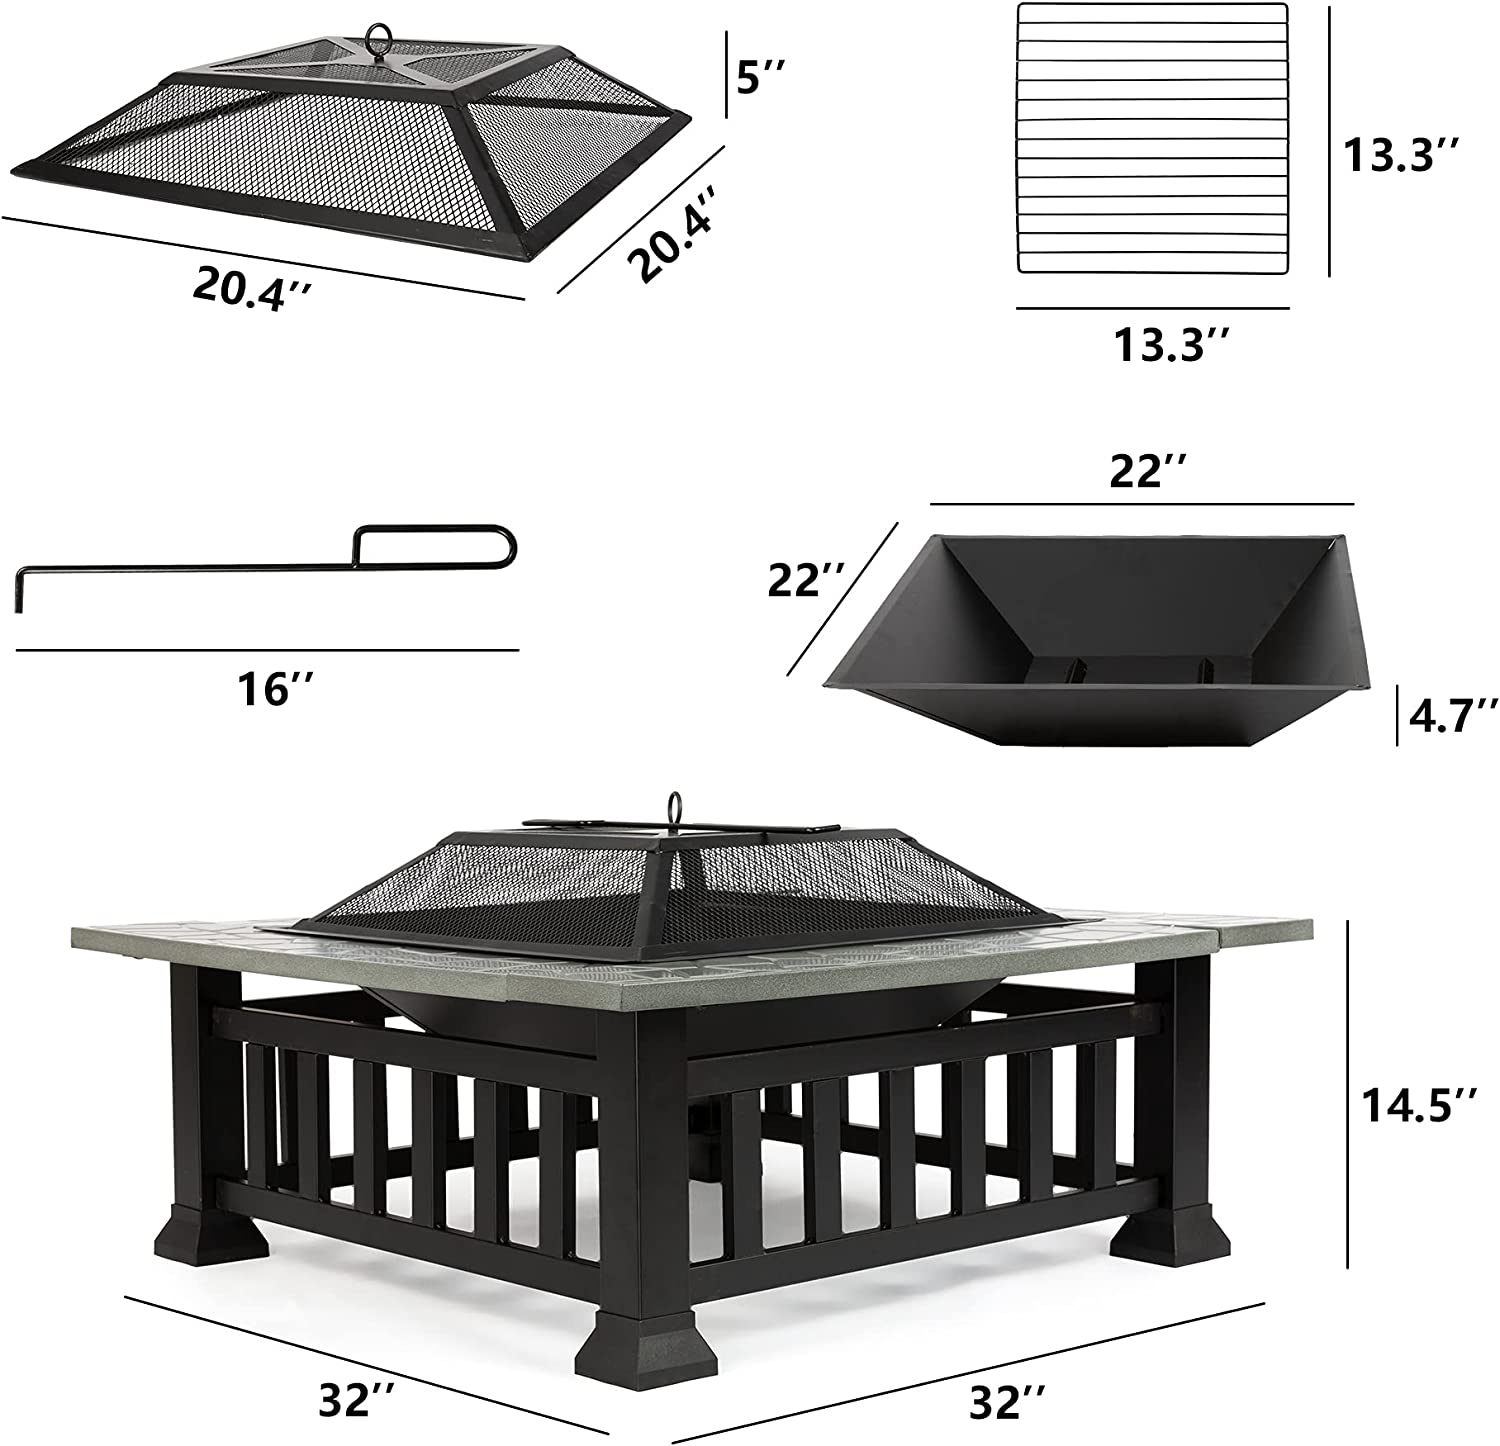 32 Inch Square Fire Pit Table with Wood-Burning Grill, Poker, Lid, and Rain Cover